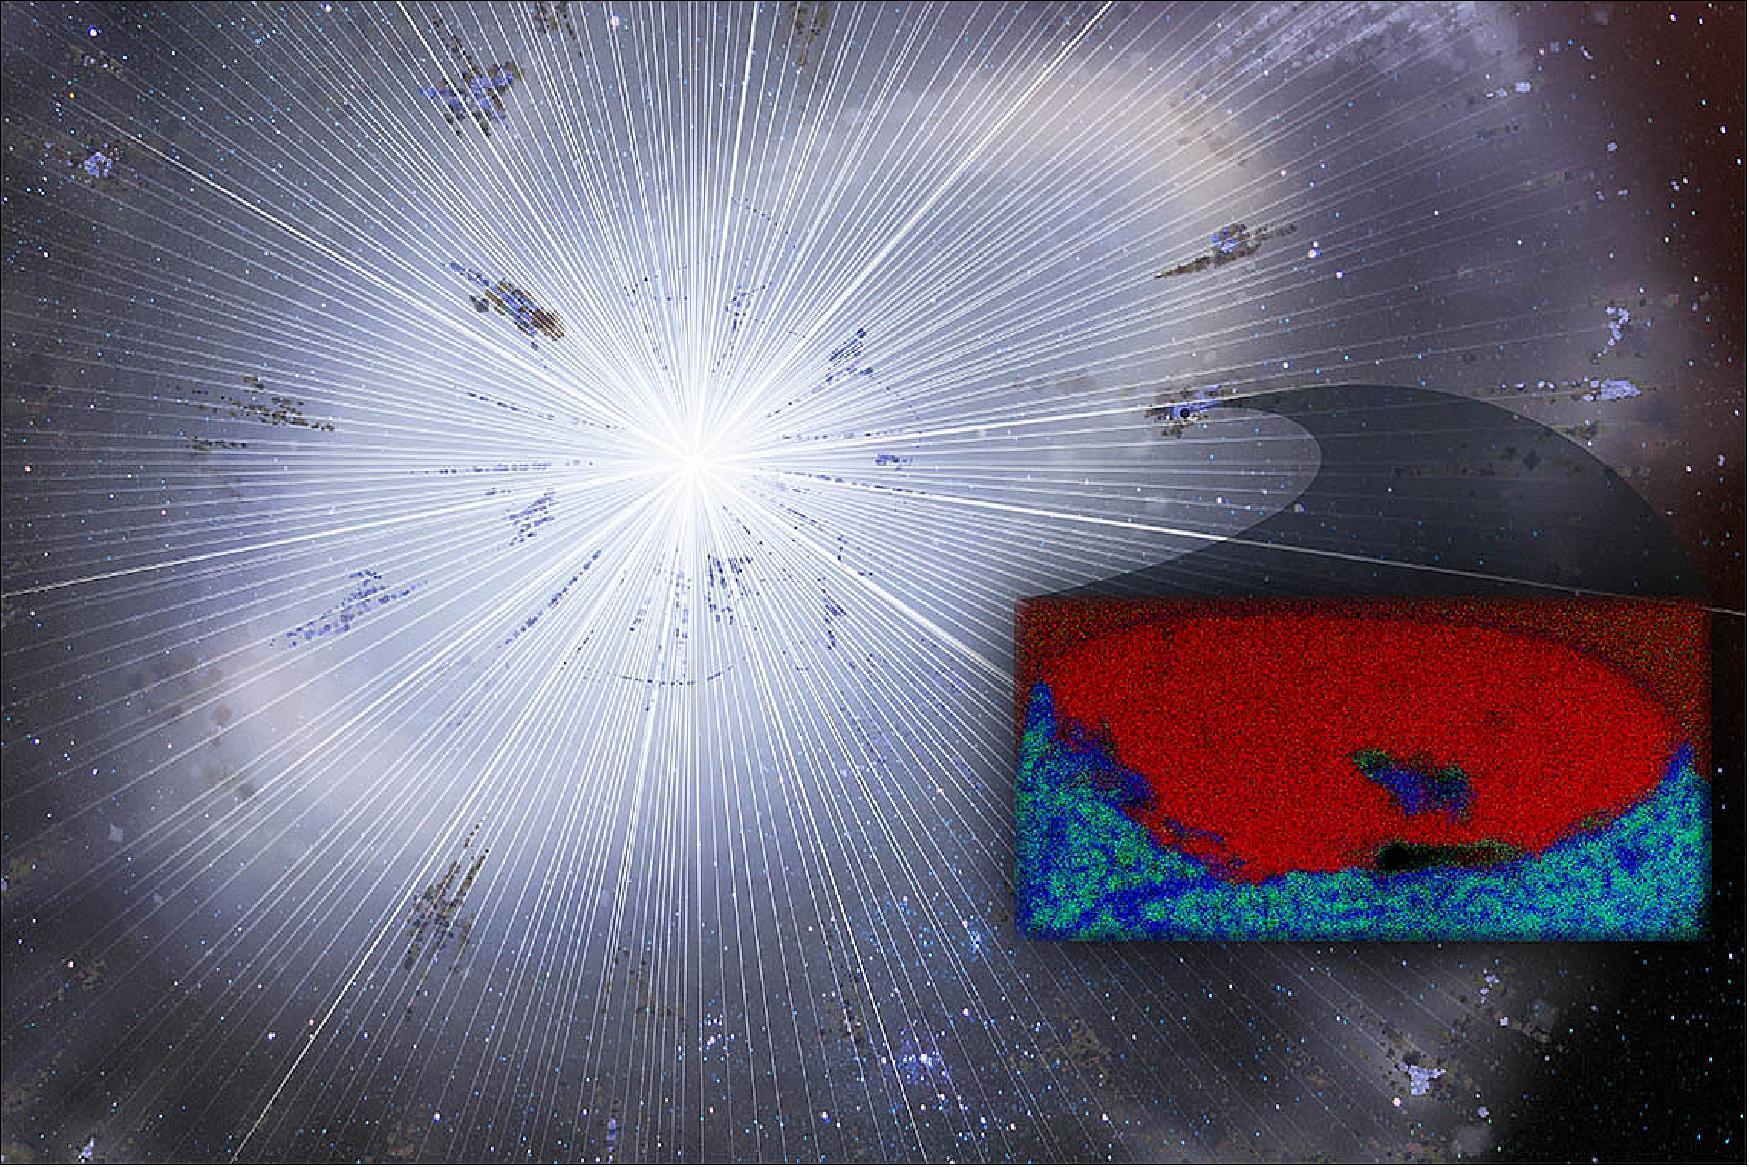 Figure 54: Researchers found a grain of stardust (inset image) that survived the formation of our solar system. The carbon-rich graphite grain (red) revealed an embedded speck (blue) of oxygen-rich material (image credit: UT, illustration by Heather Roper/University of Arizona)